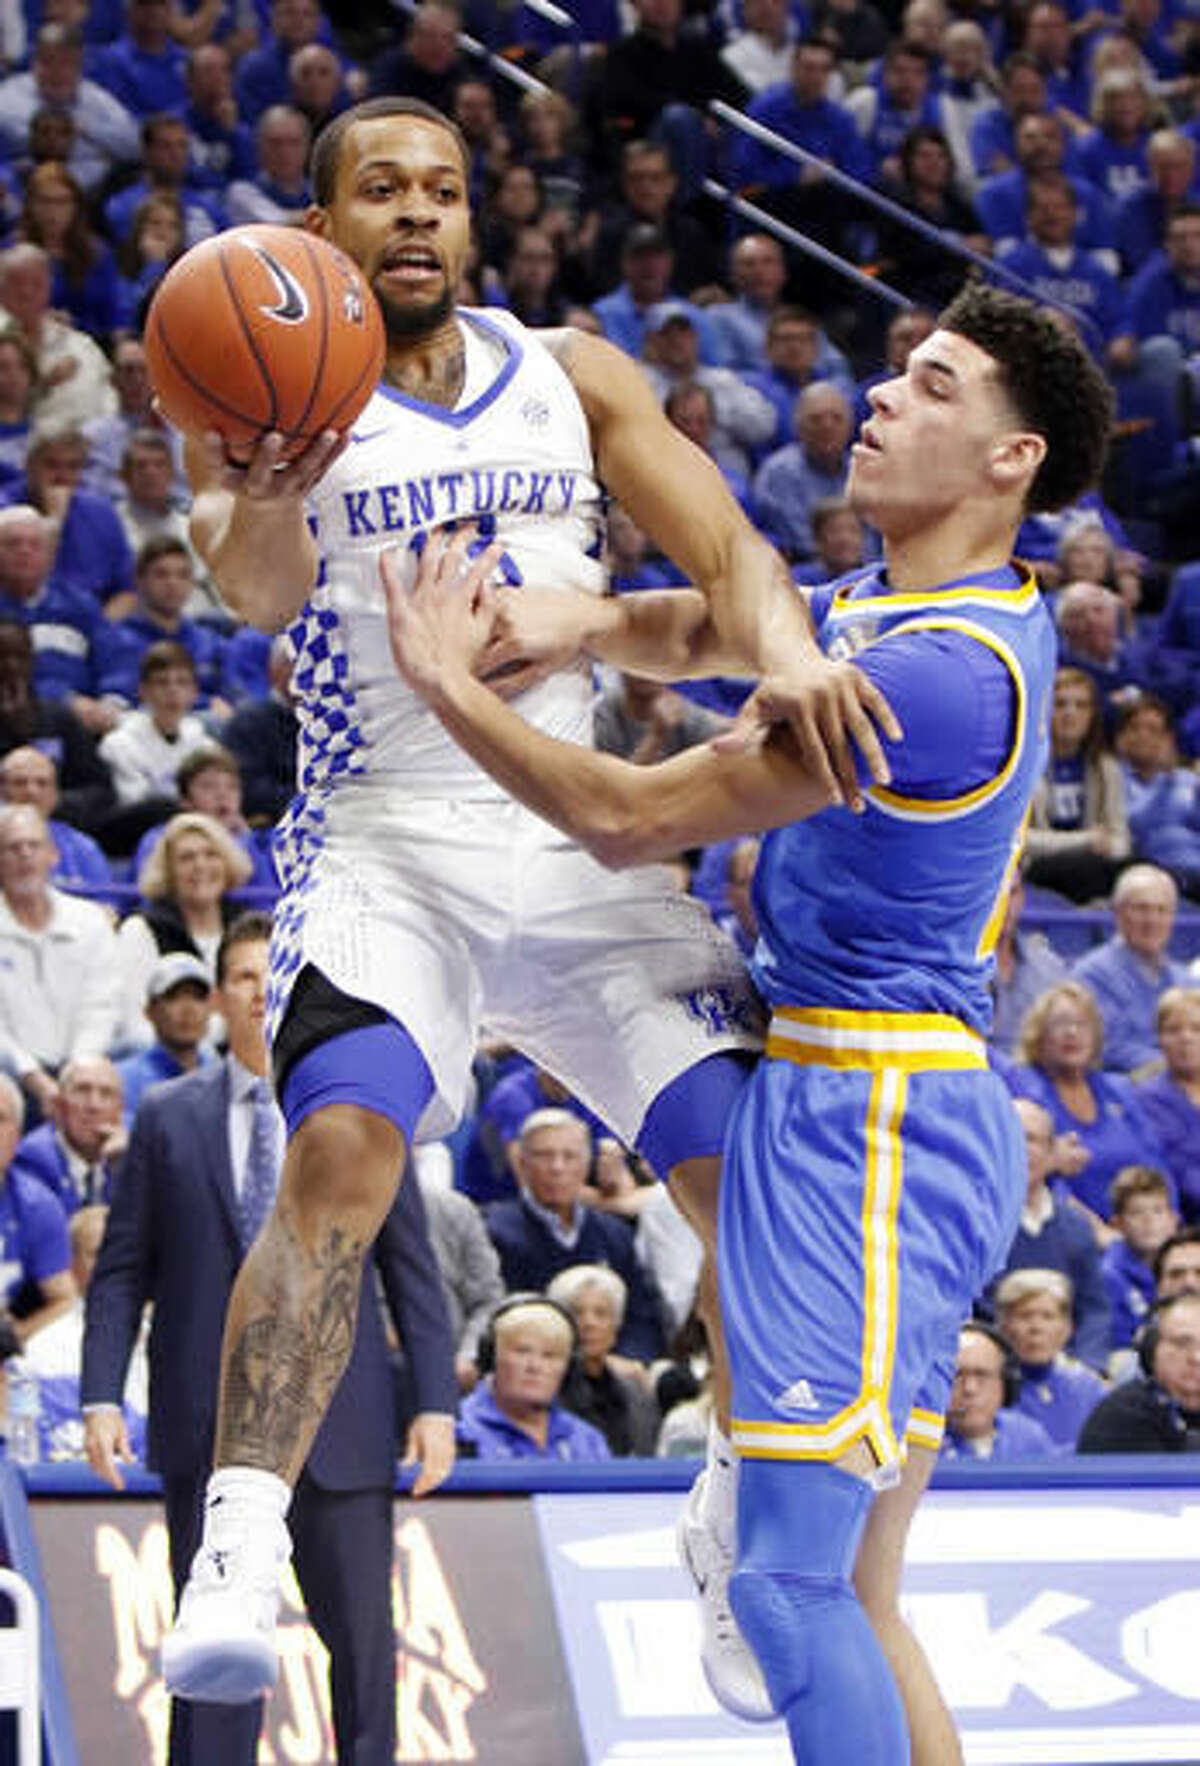 Kentucky's Isaiah Briscoe, left, passes near UCLA's Lonzo Ball during the first half of an NCAA college basketball game, Saturday, Dec. 3, 2016, in Lexington, Ky. (AP Photo/James Crisp)